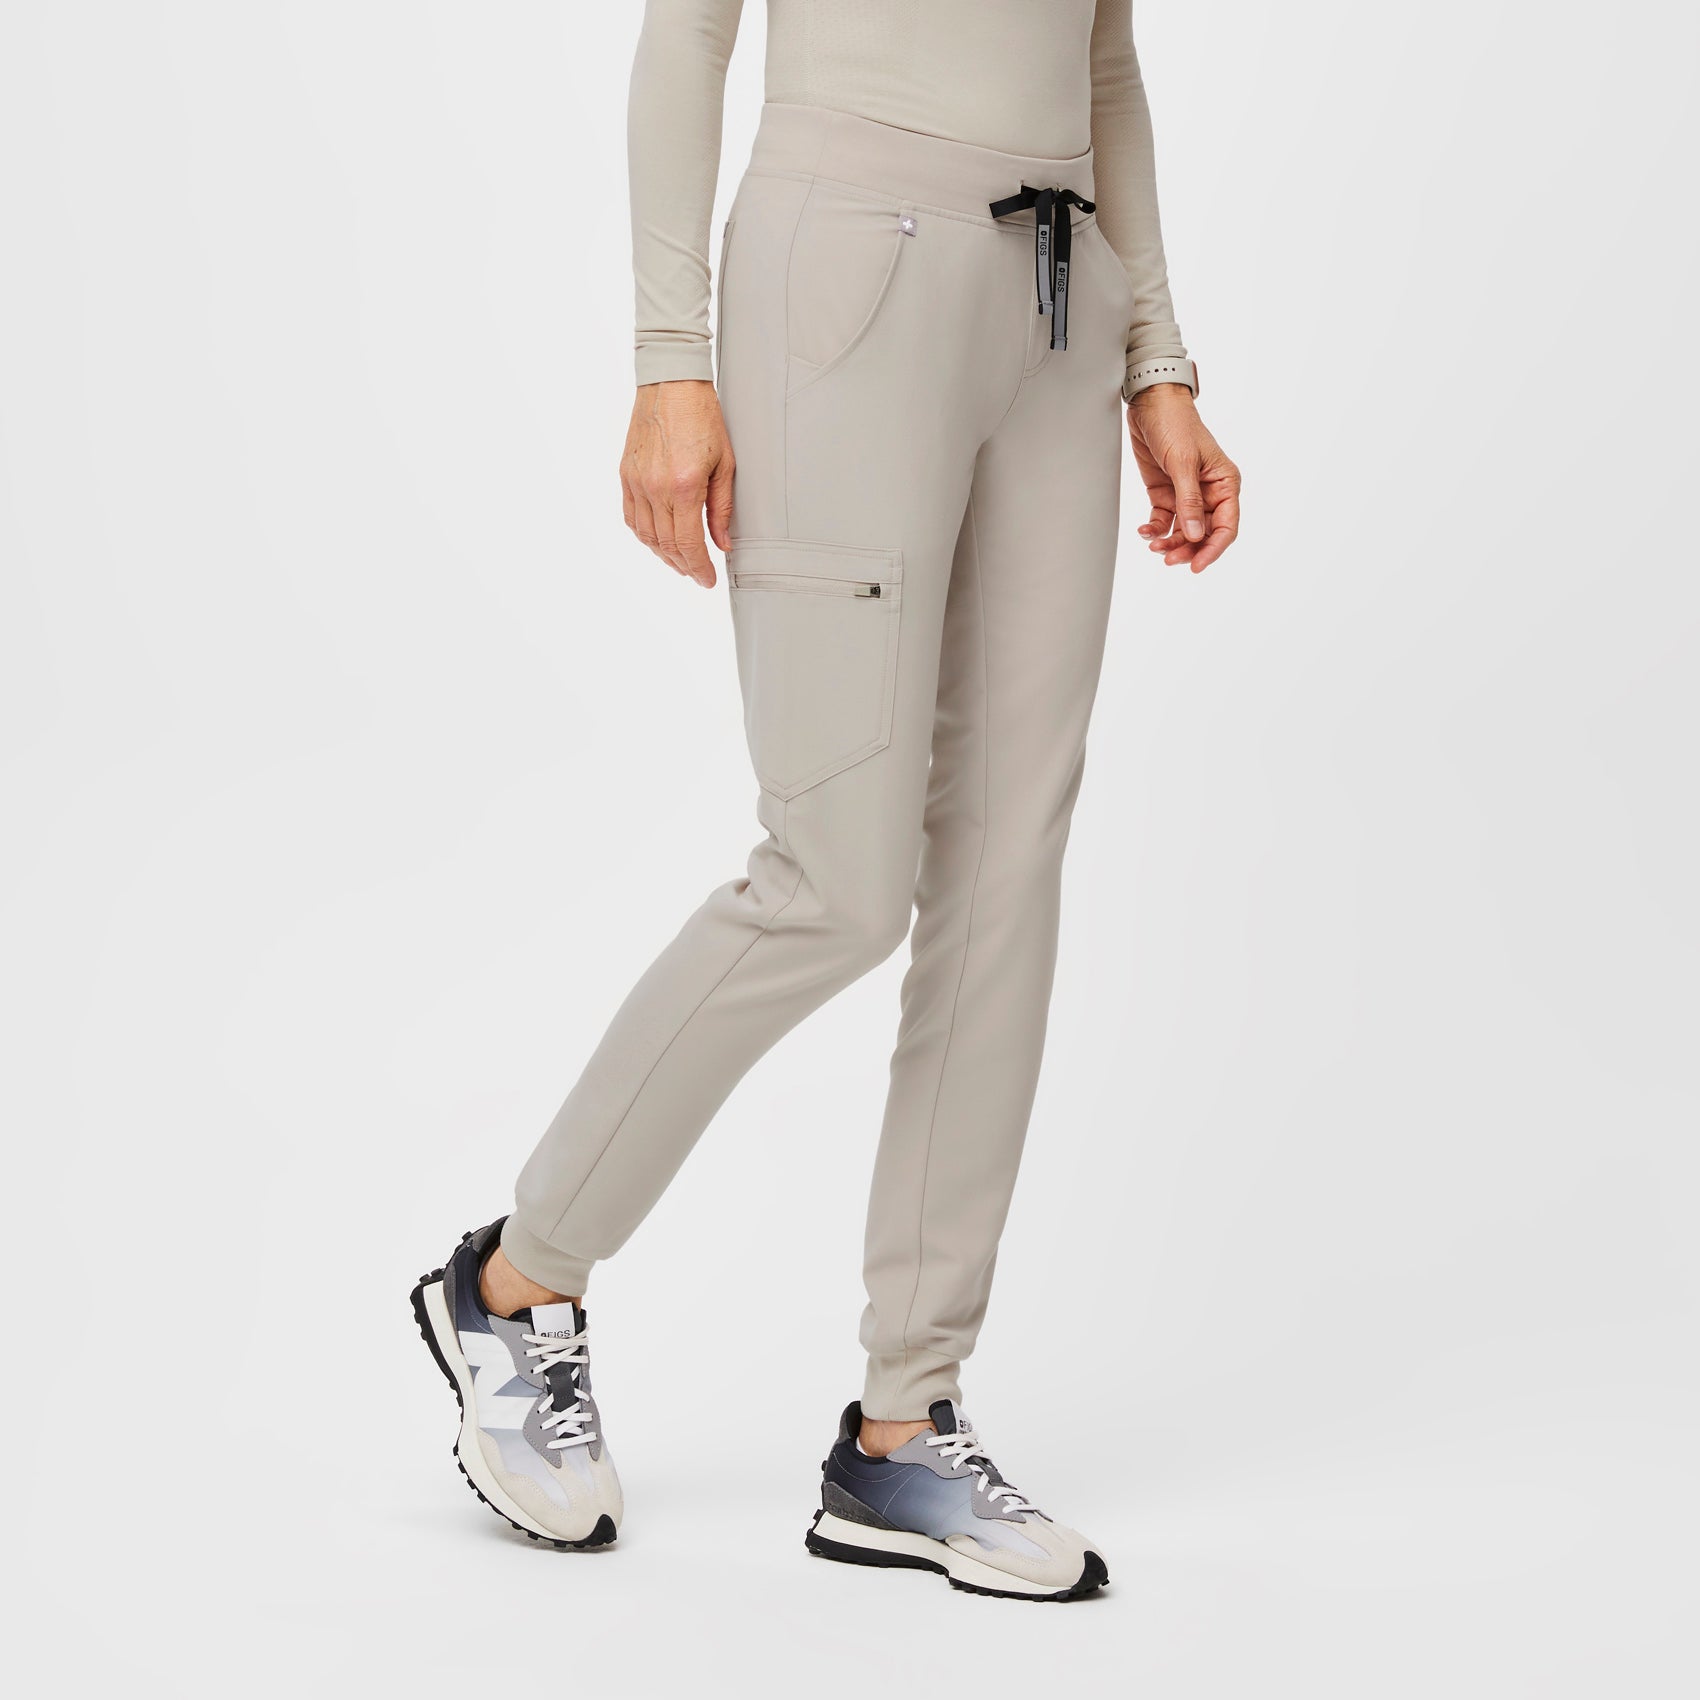 FIGS Zamora Jogger Scrub Pants in Graphite Size undefined - $30 - From  Christina